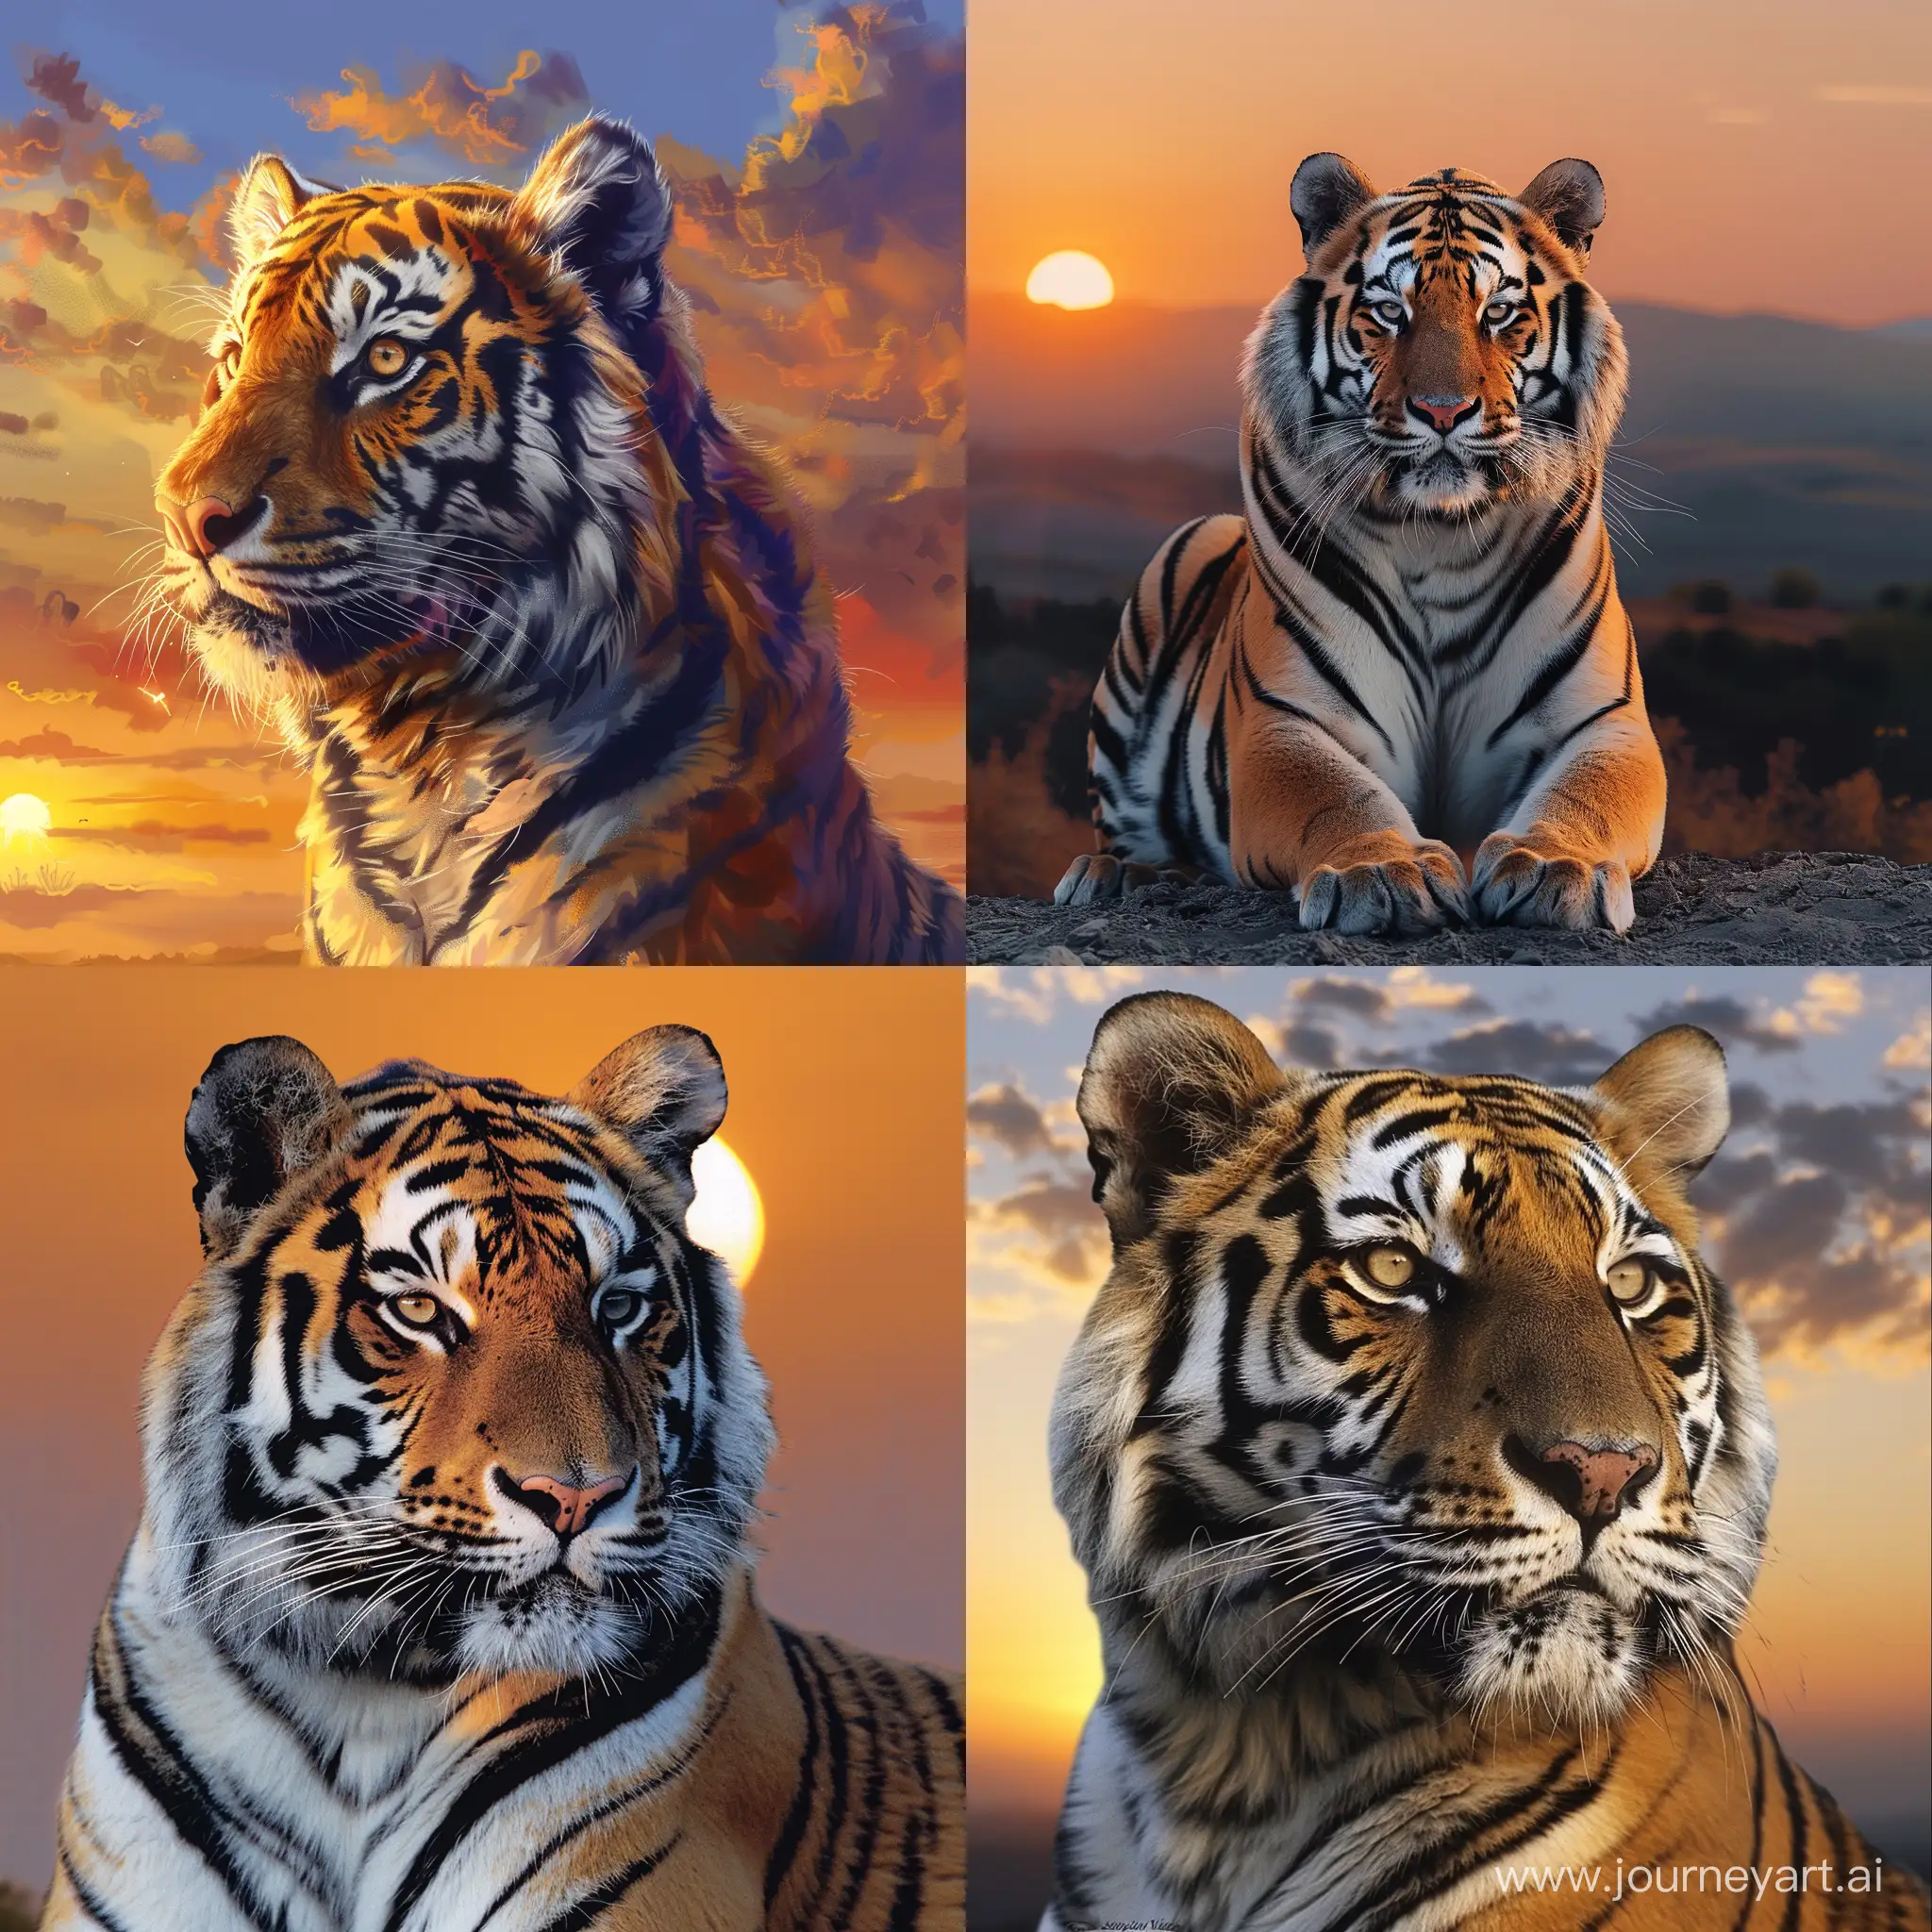 SIBERIAN TIGER IN SN0W WITH SUNSET BACKGROUND